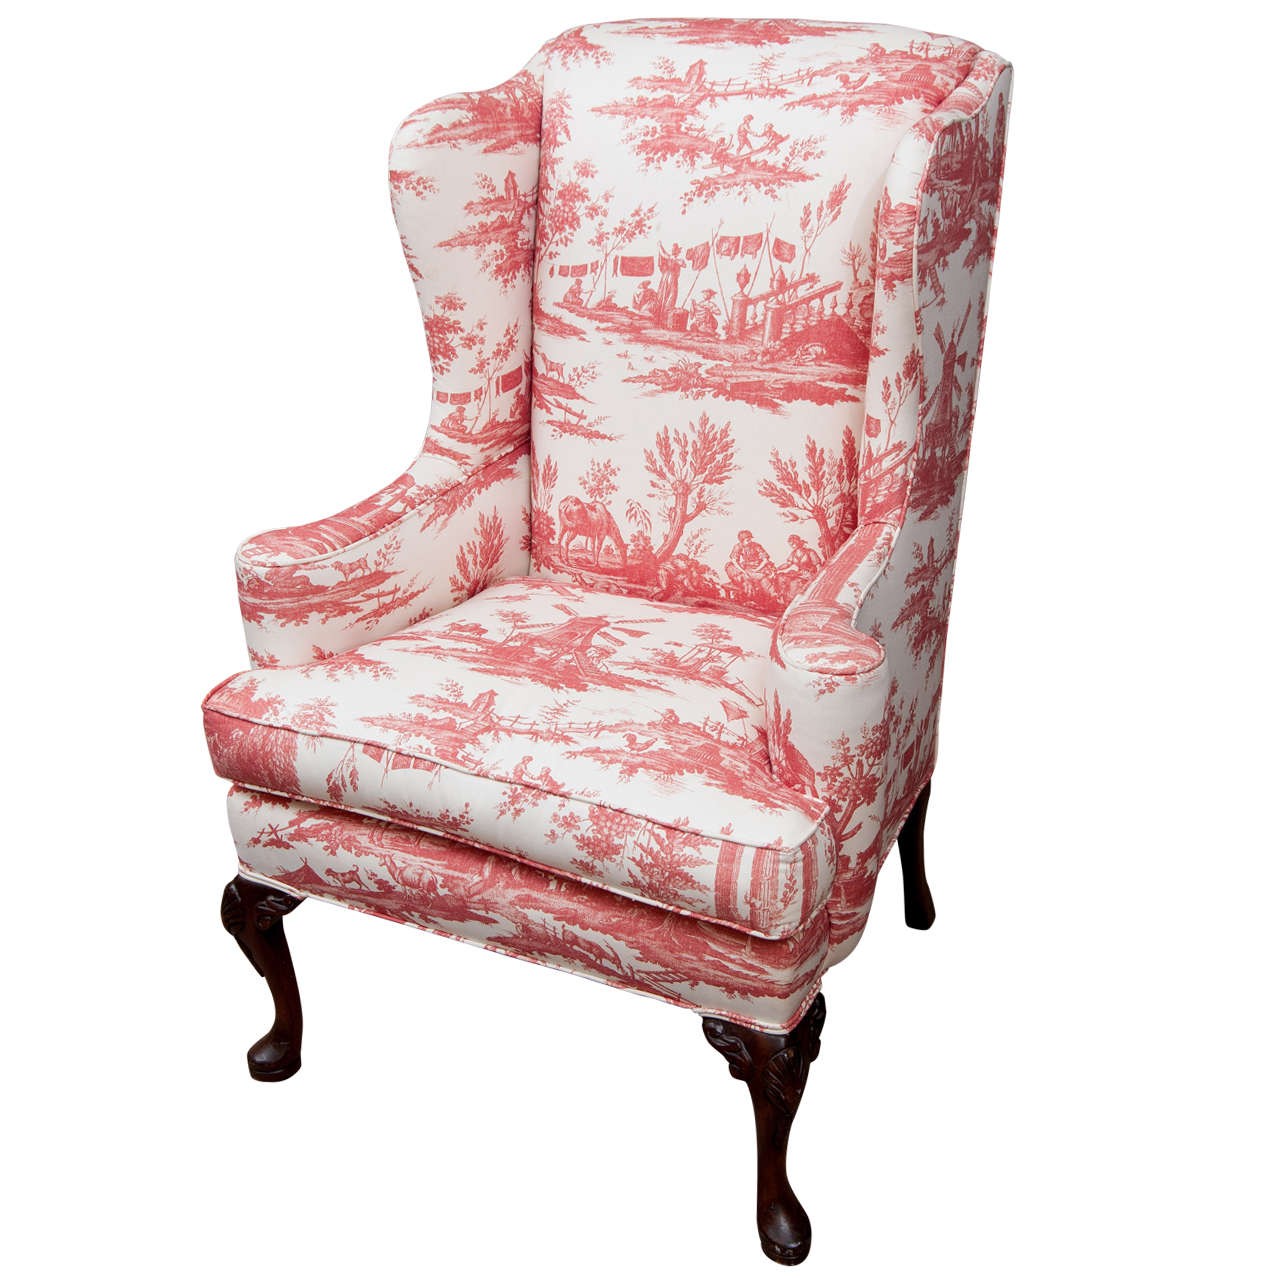 Queen anne style wing chair at 1stdibs